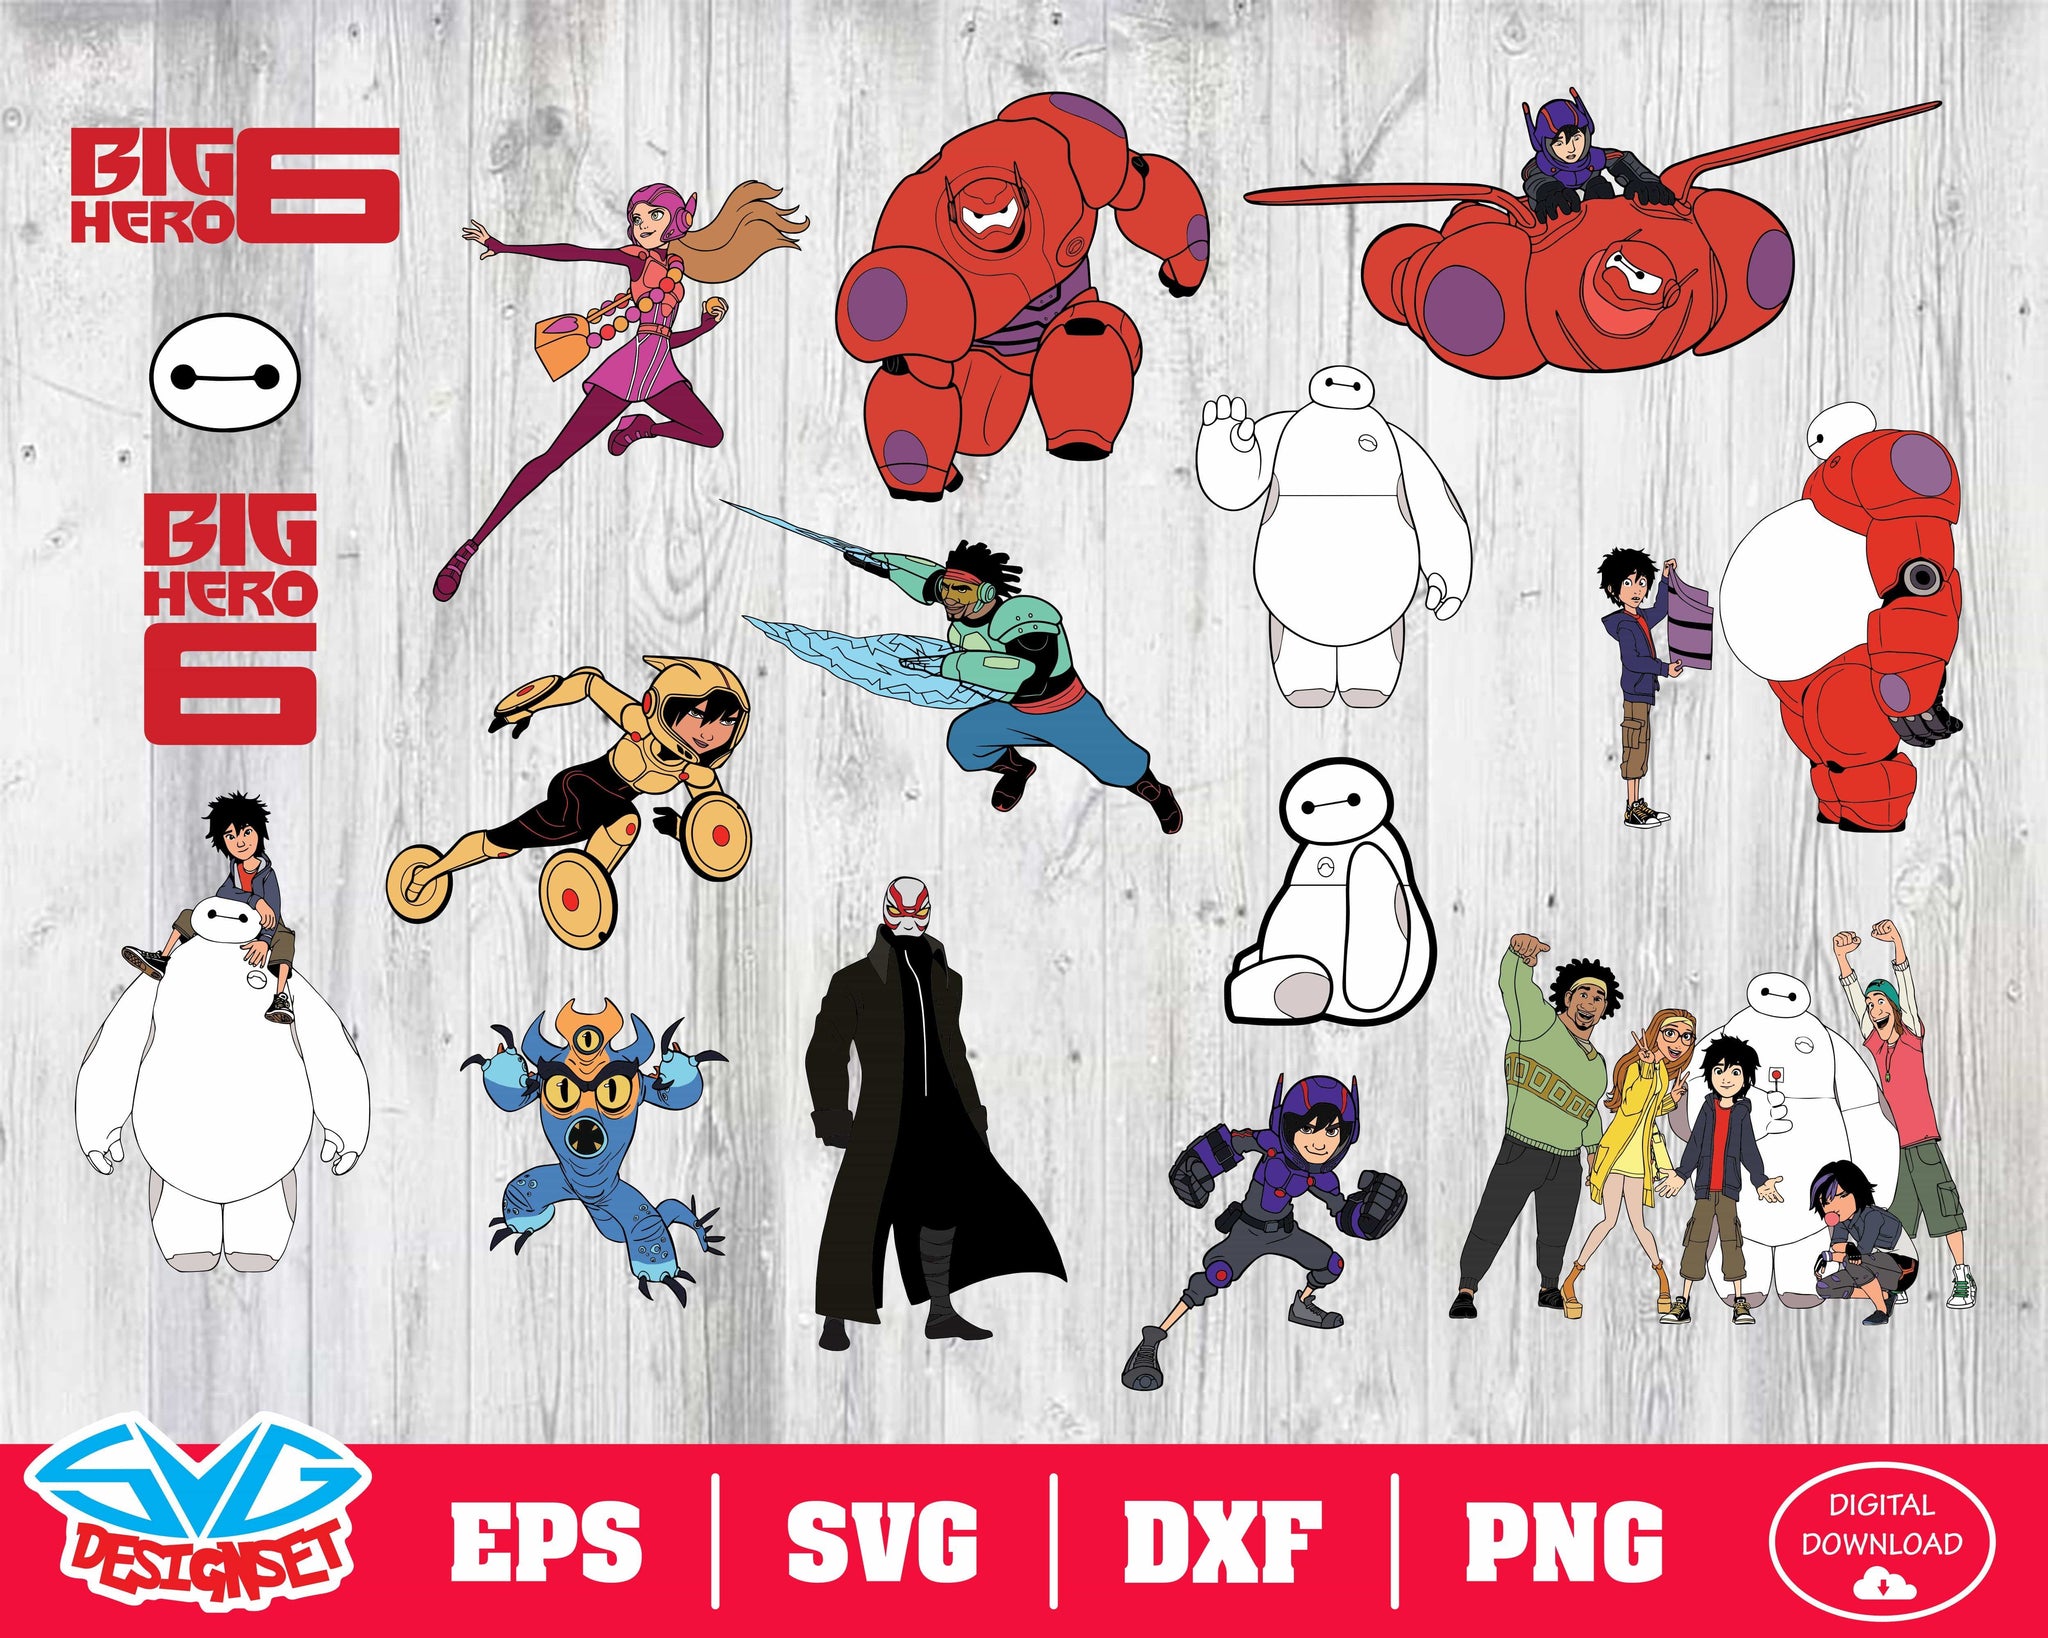 Big Hero 6 Svg, Dxf, Eps, Png, Clipart, Silhouette and Cutfiles #1 - SVGDesignSets